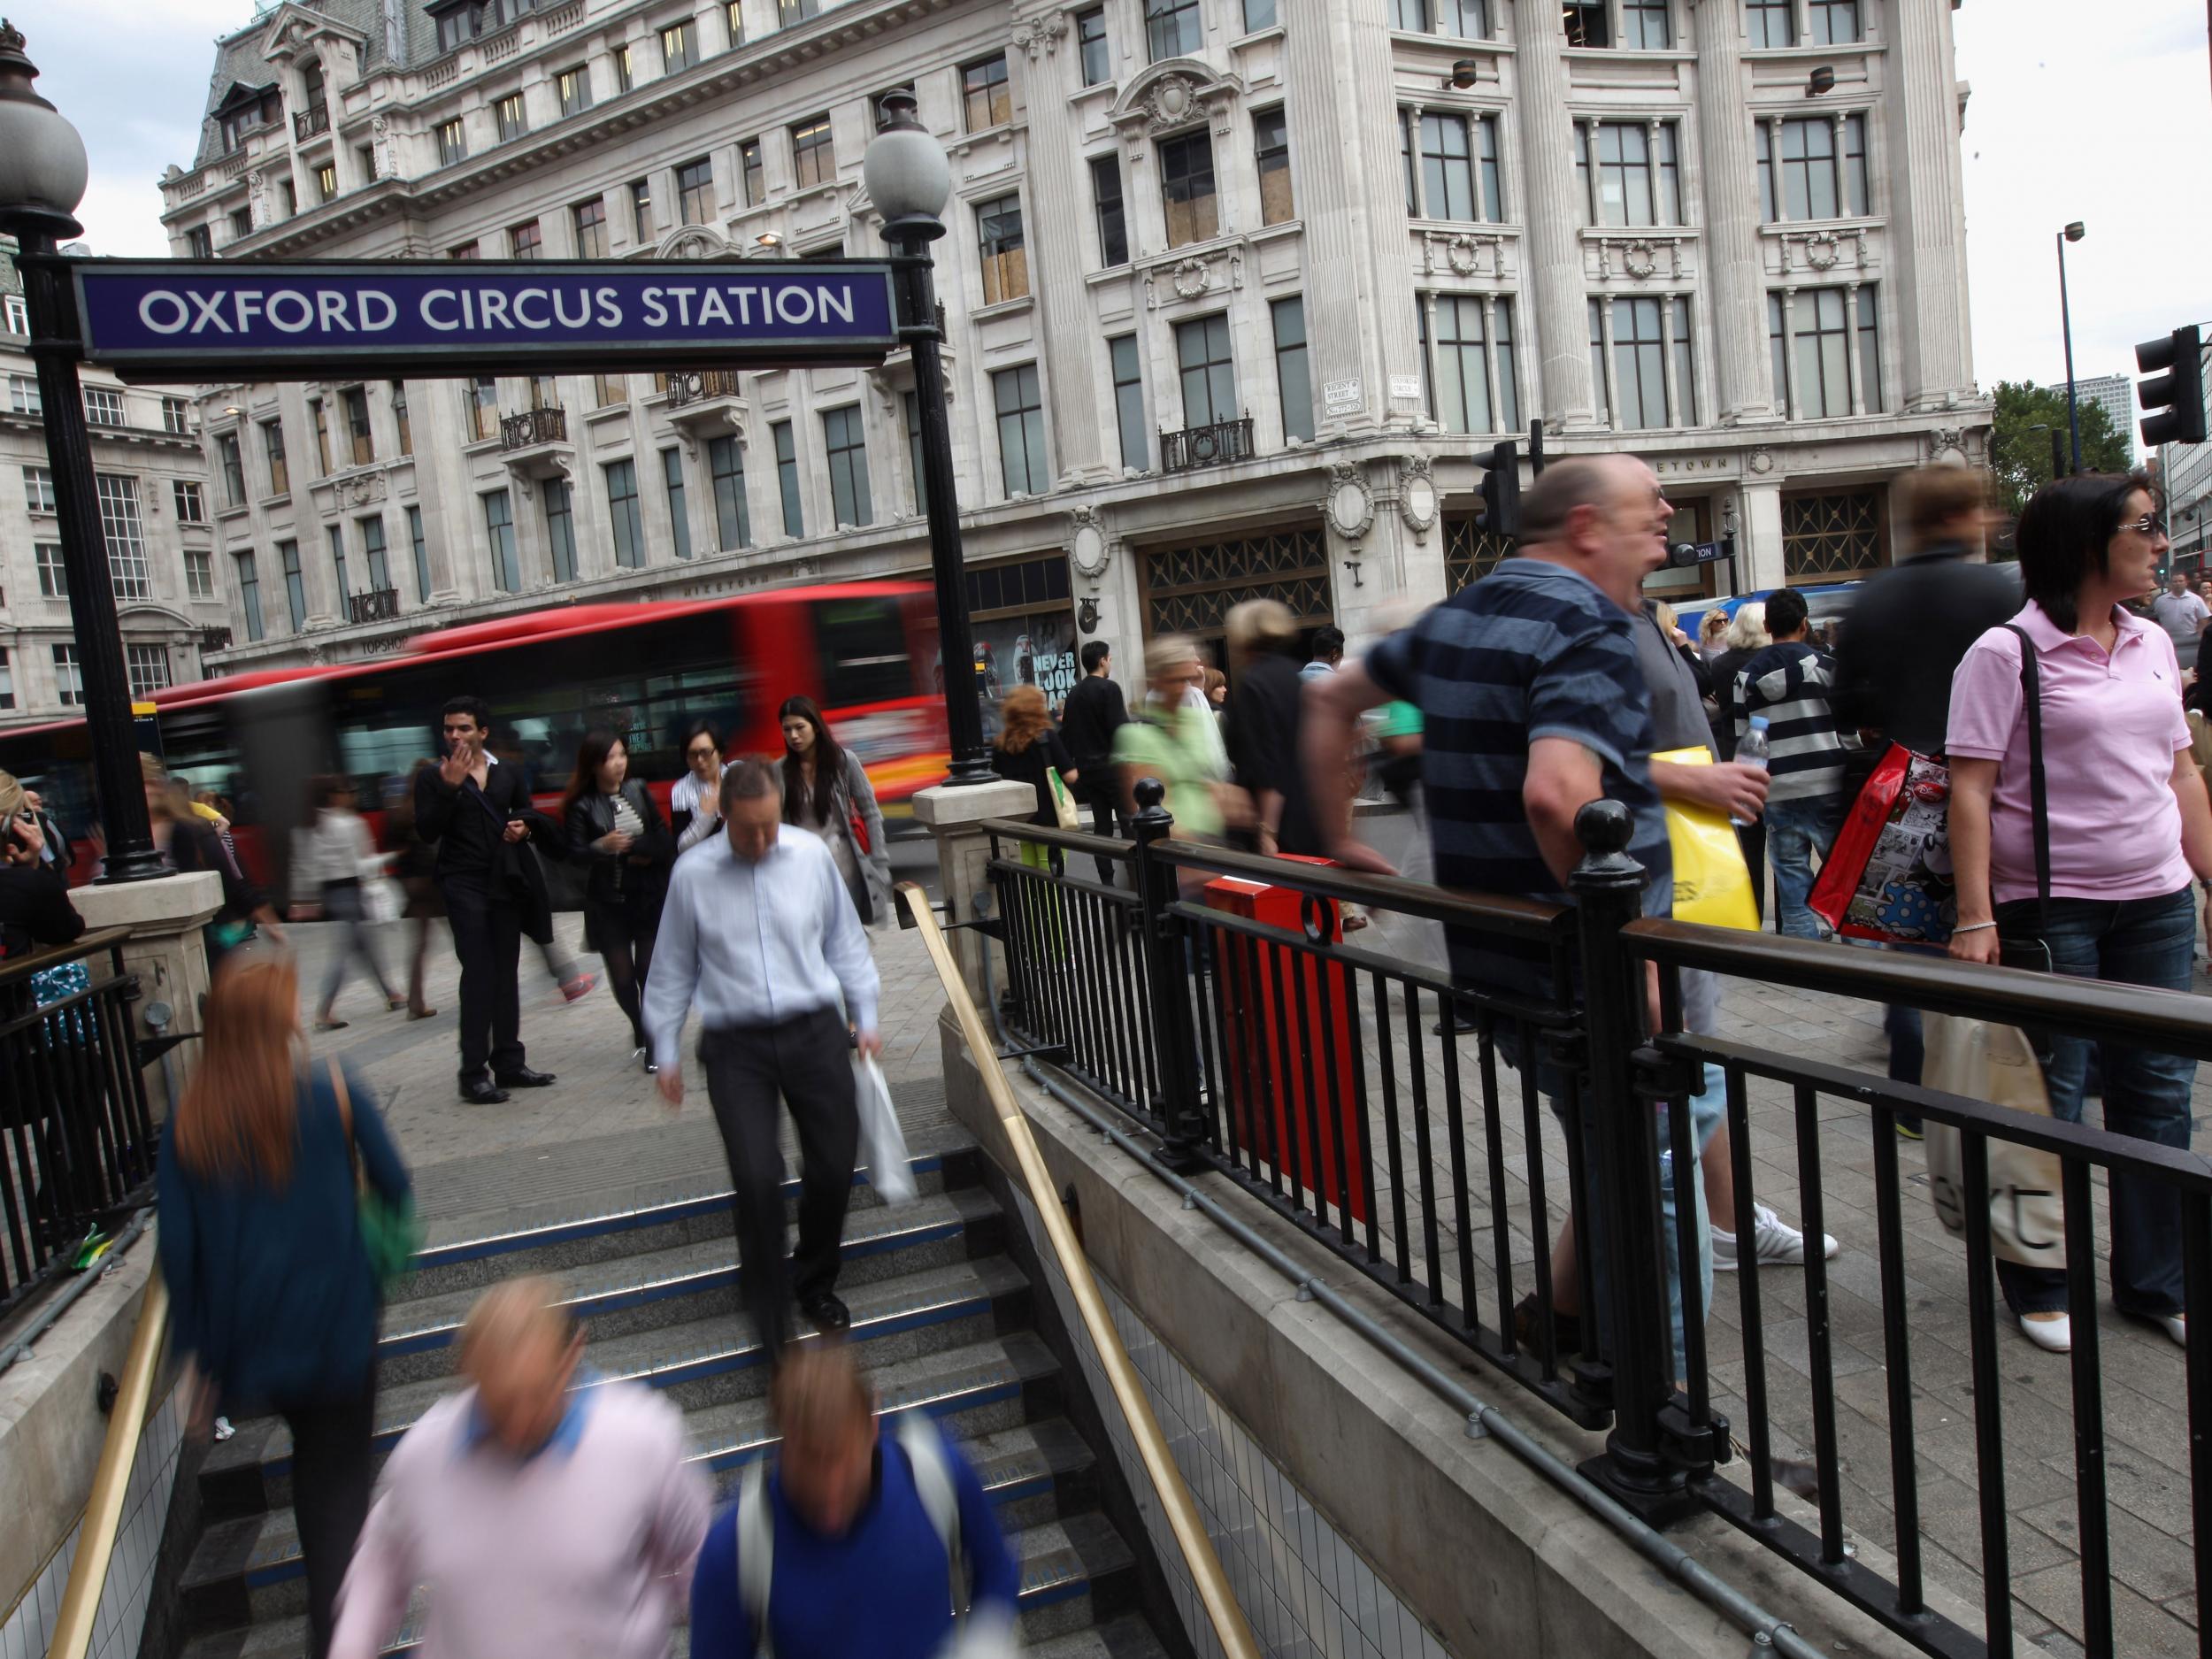 &#13;
Oxford Circus station was the second most crime-ridden, along with Stratford Getty&#13;